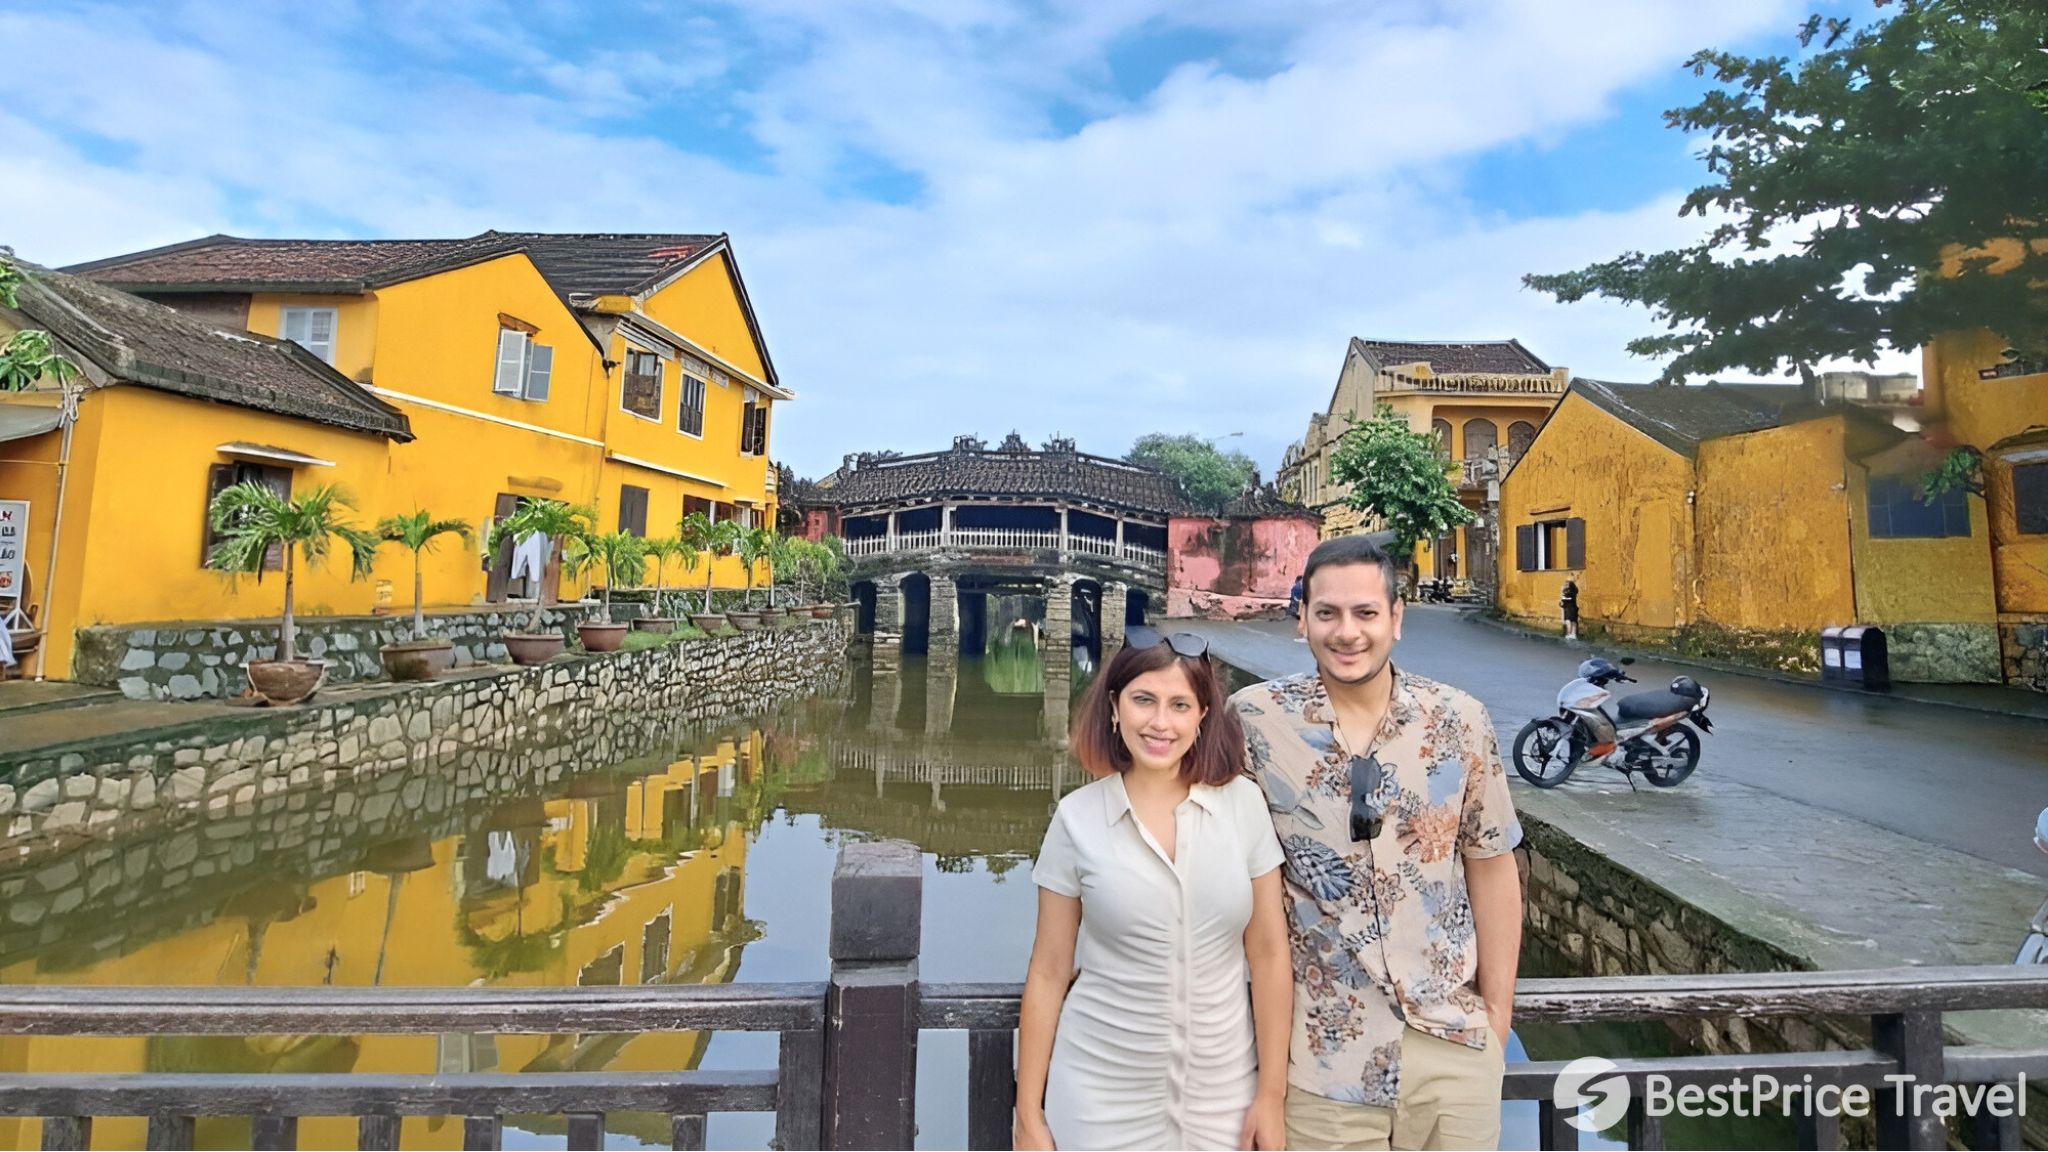 Day 11 Take Pictures With The Iconic Japanese Covered Bridge In Hoi An